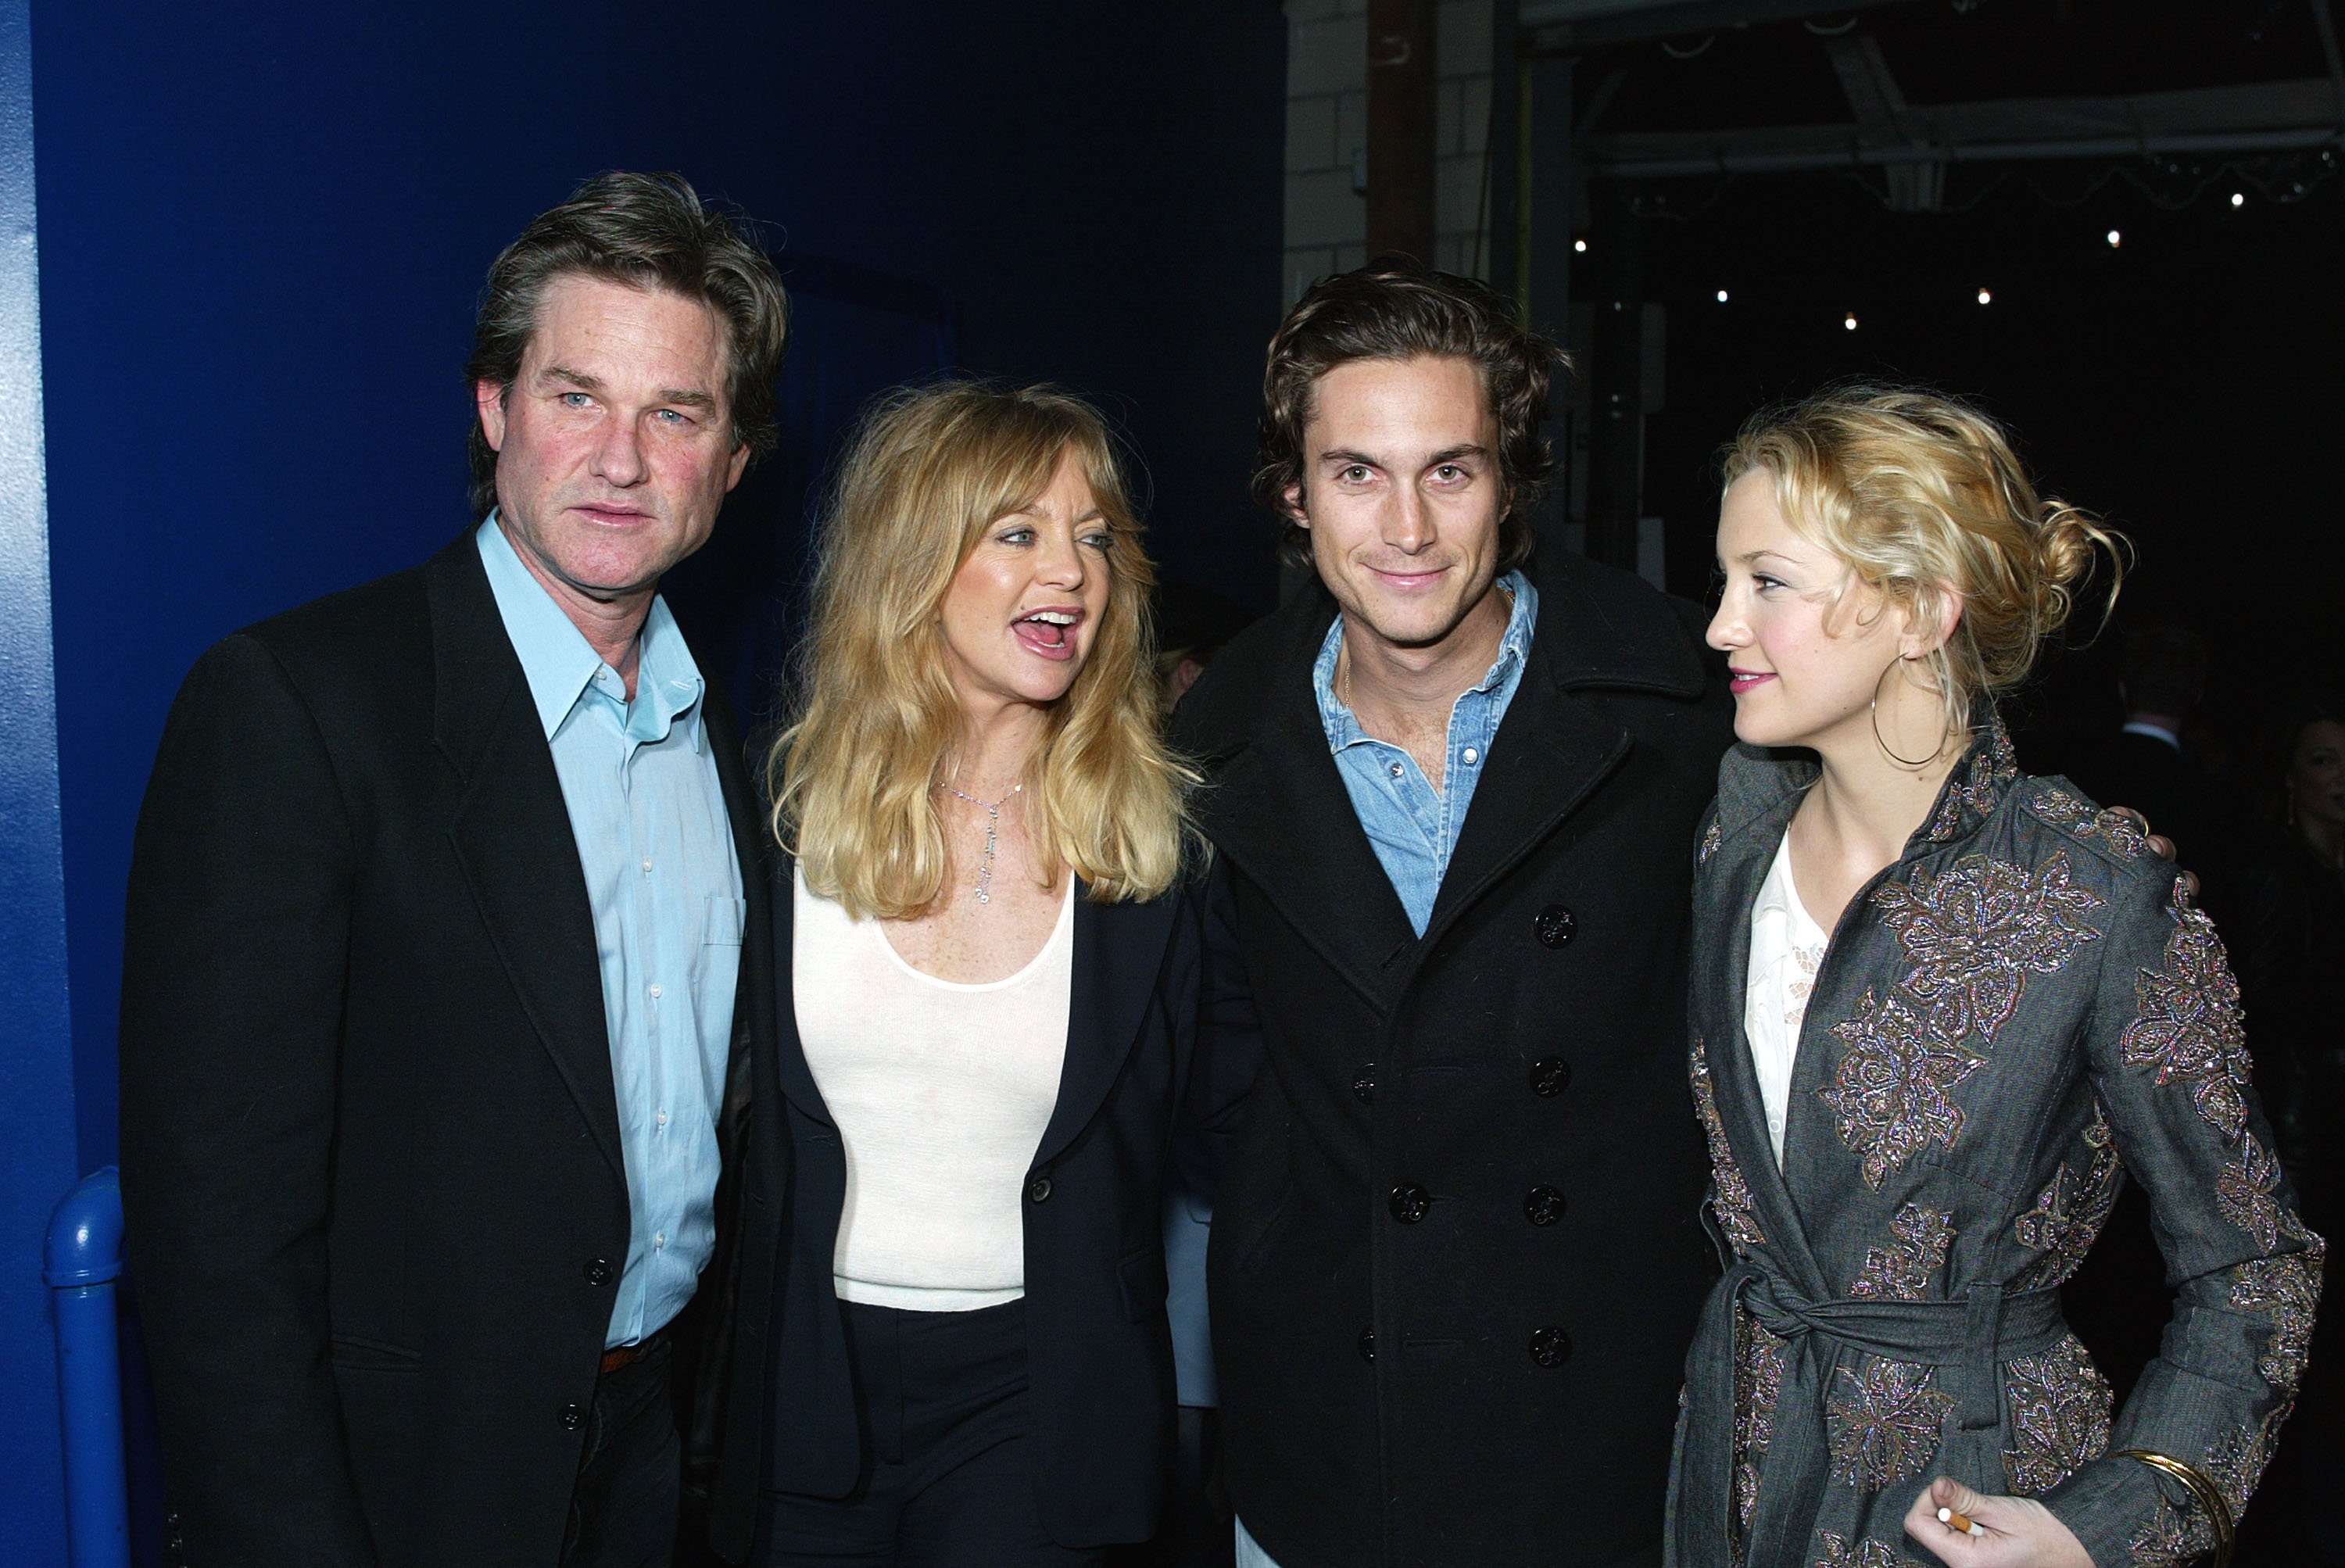 Actors (L-R) Kurt Russell, Goldie Hawn, Oliver Hudson and his sister Kate Hudson pose at the post-premiere party for "Dark Blue" on Febraury 12, 2003  | Source: Getty Images